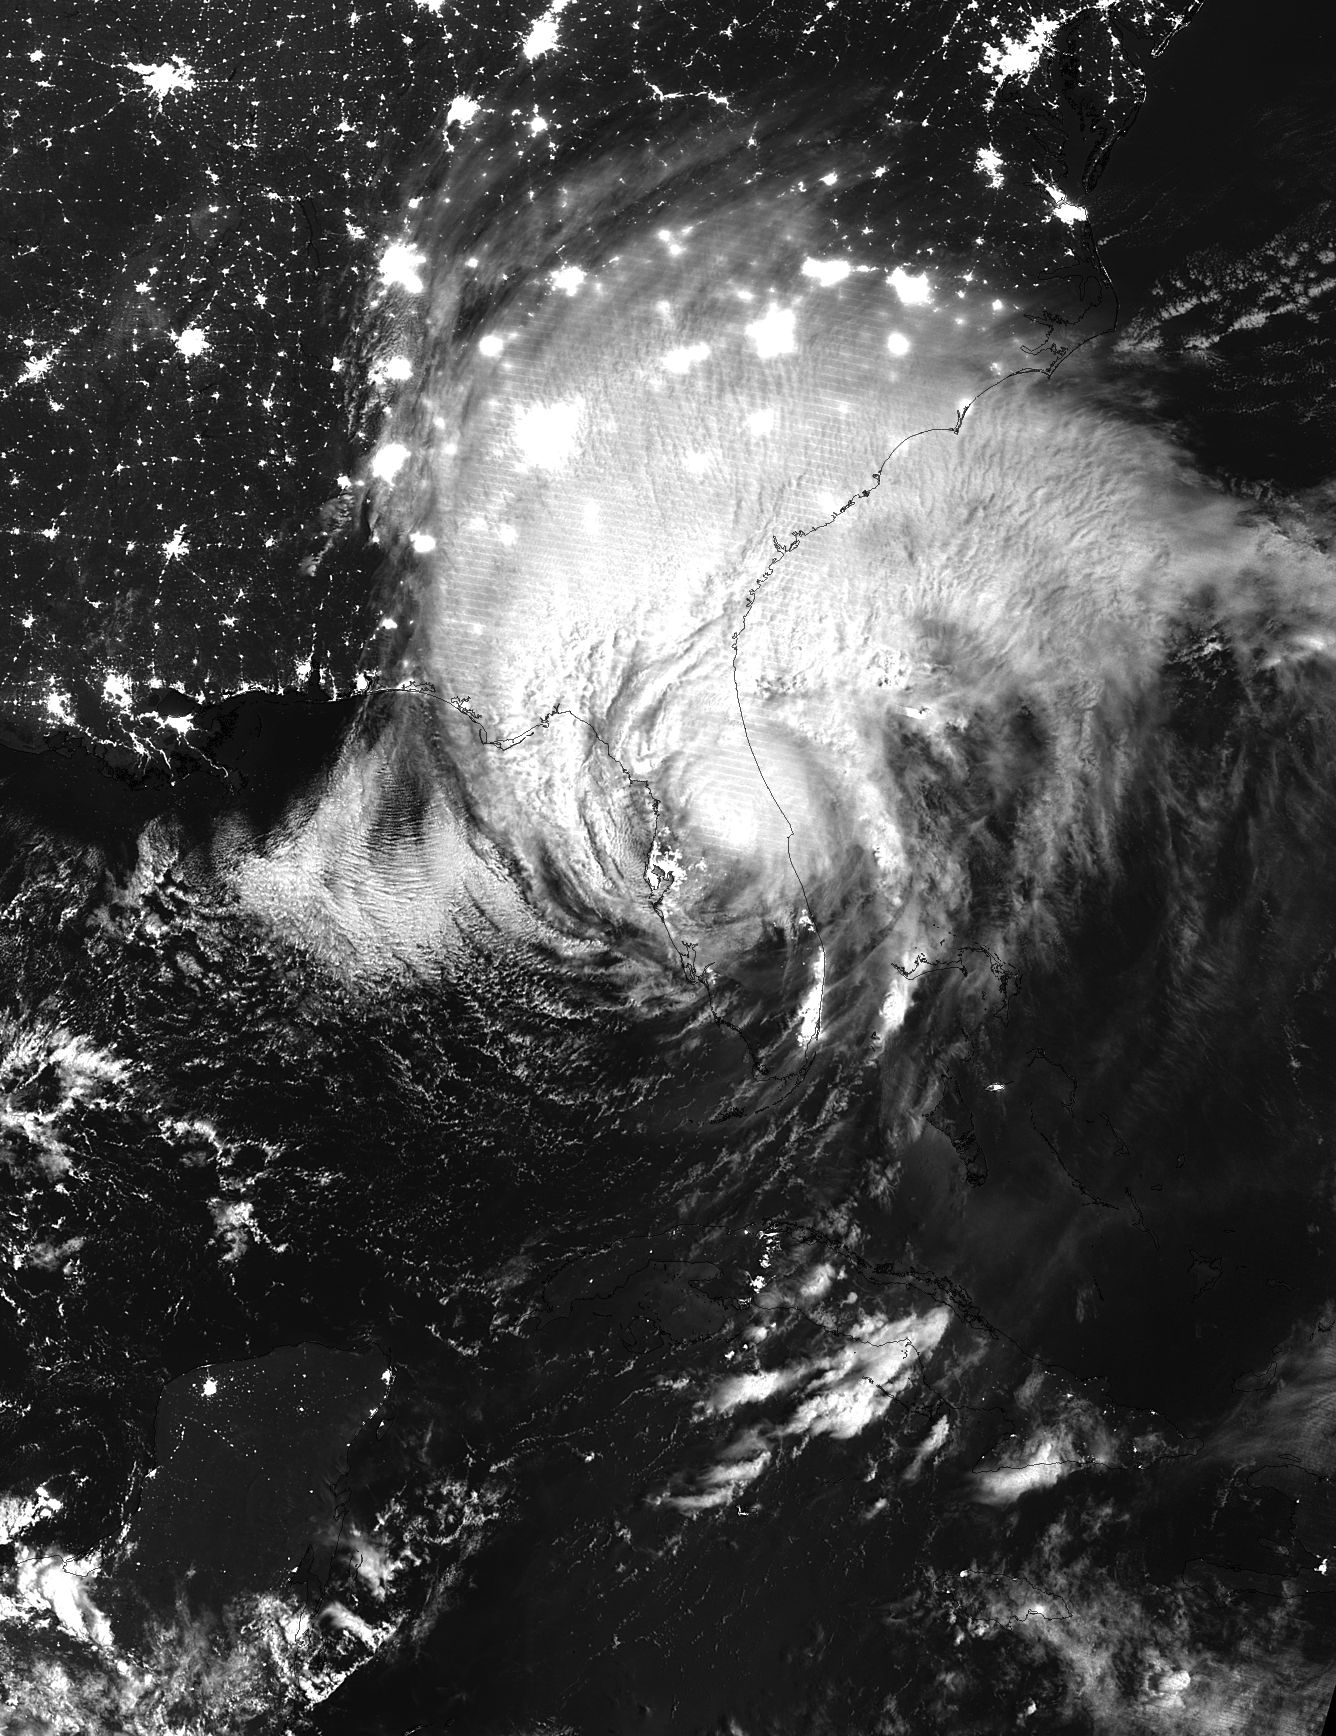 Satellite image of Irma at night, in black and white. Electric lights shine on land under the white cloud over the southeastern US coast.